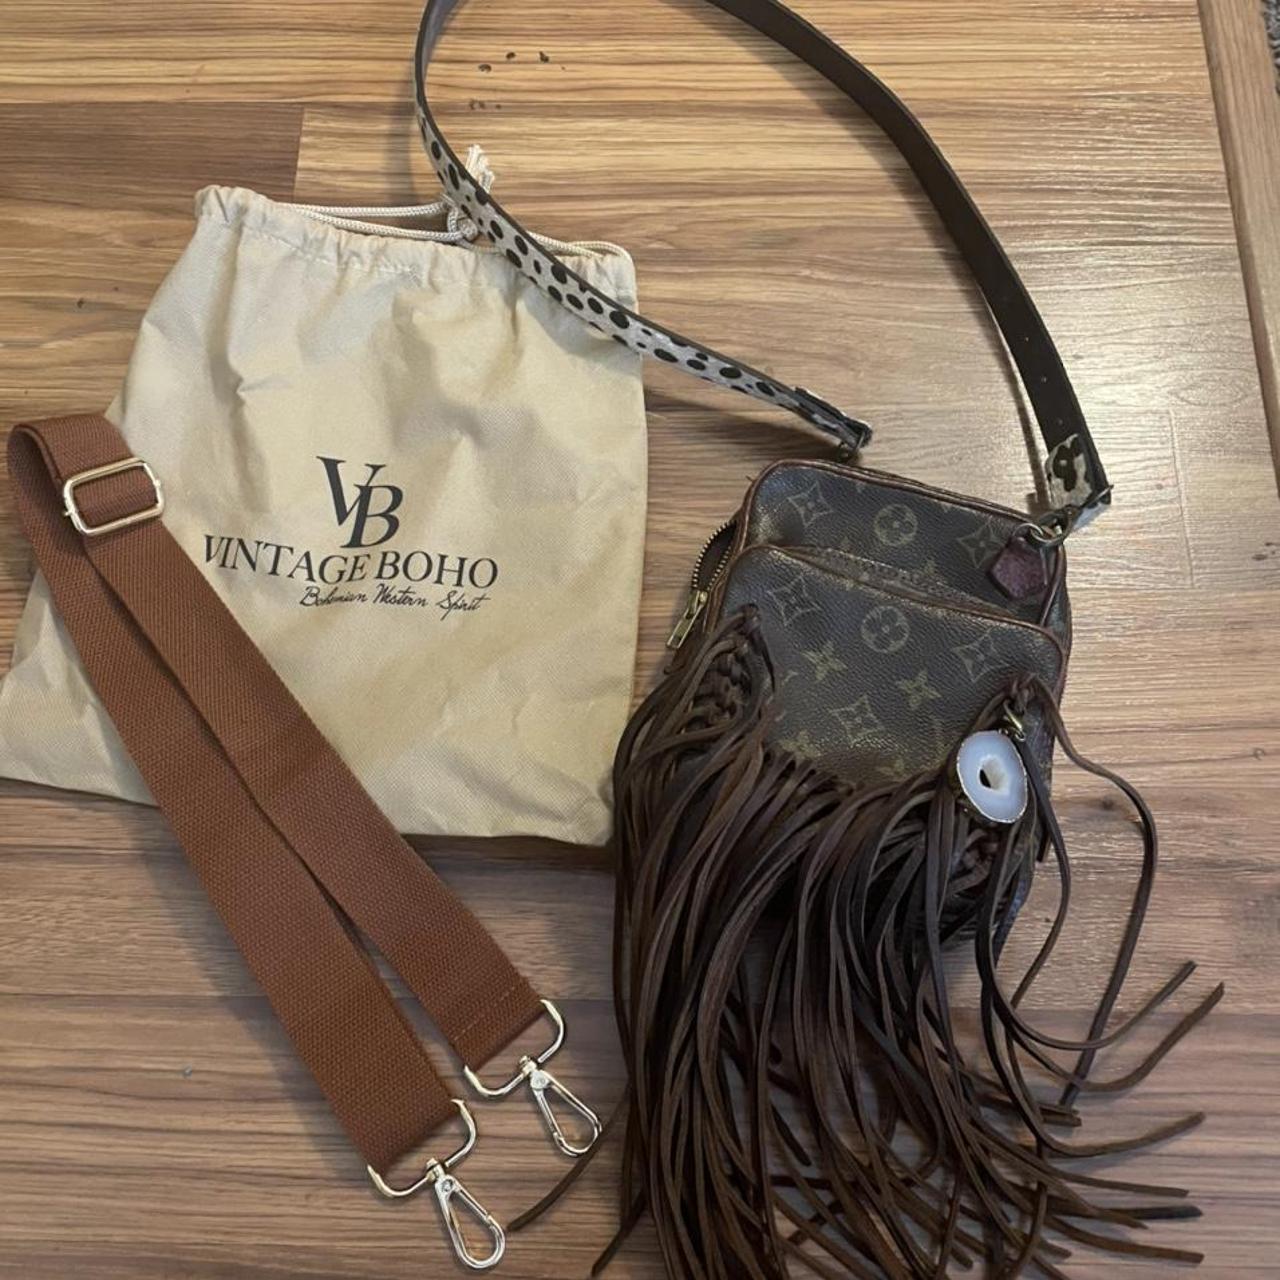 Authentic Louis Vuitton crossbody bag from Vintage